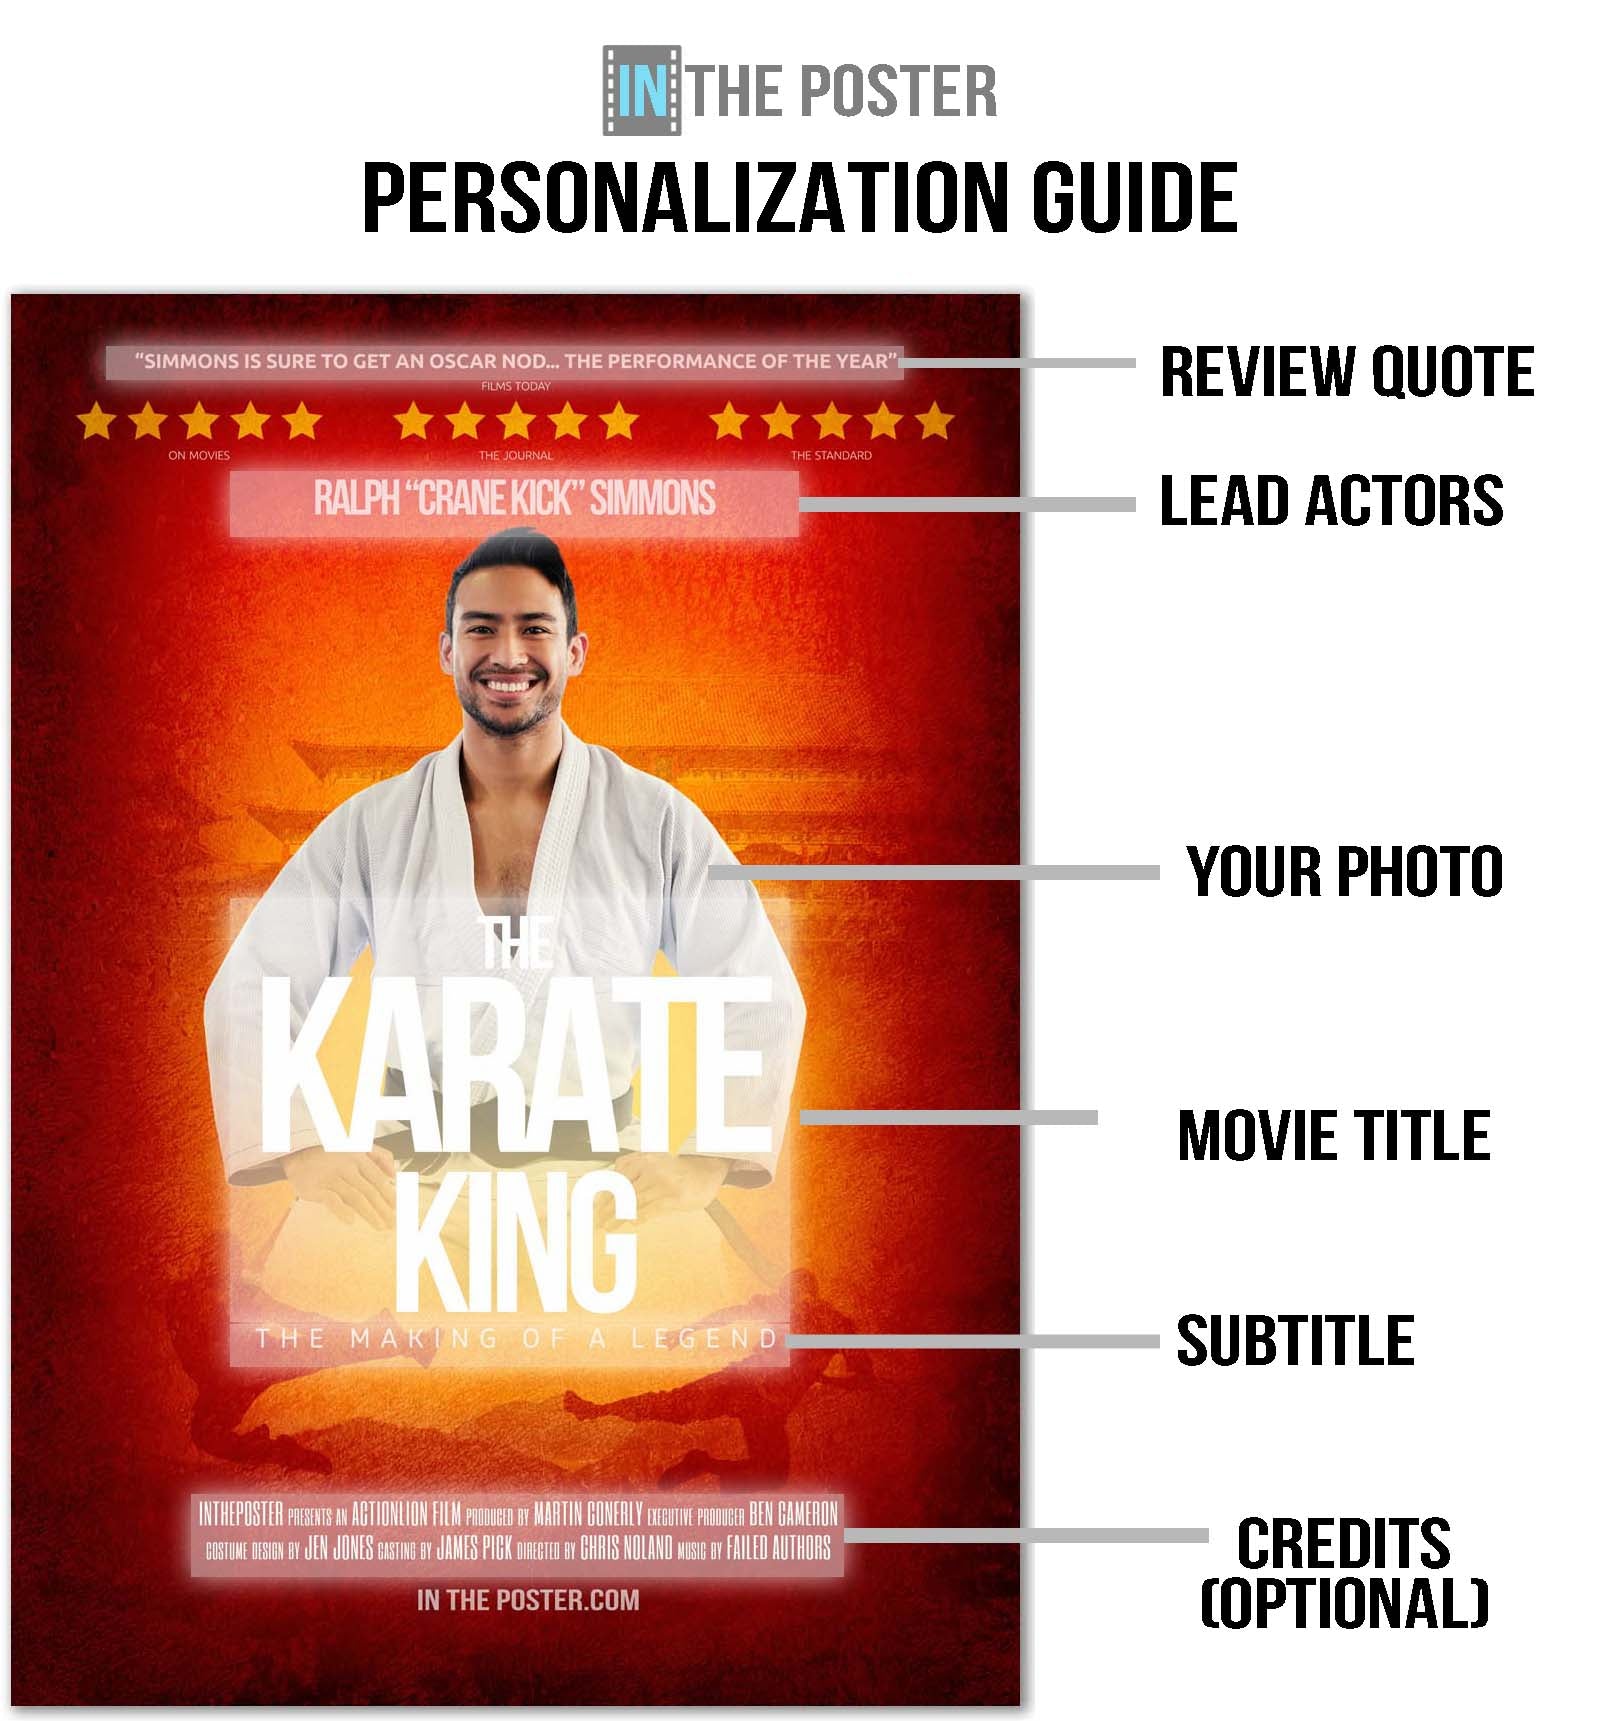 A guide on how to personalize the martial arts movie poster, with arrows showing where the review quote, lead actors, photo upload, title and subtitle go.